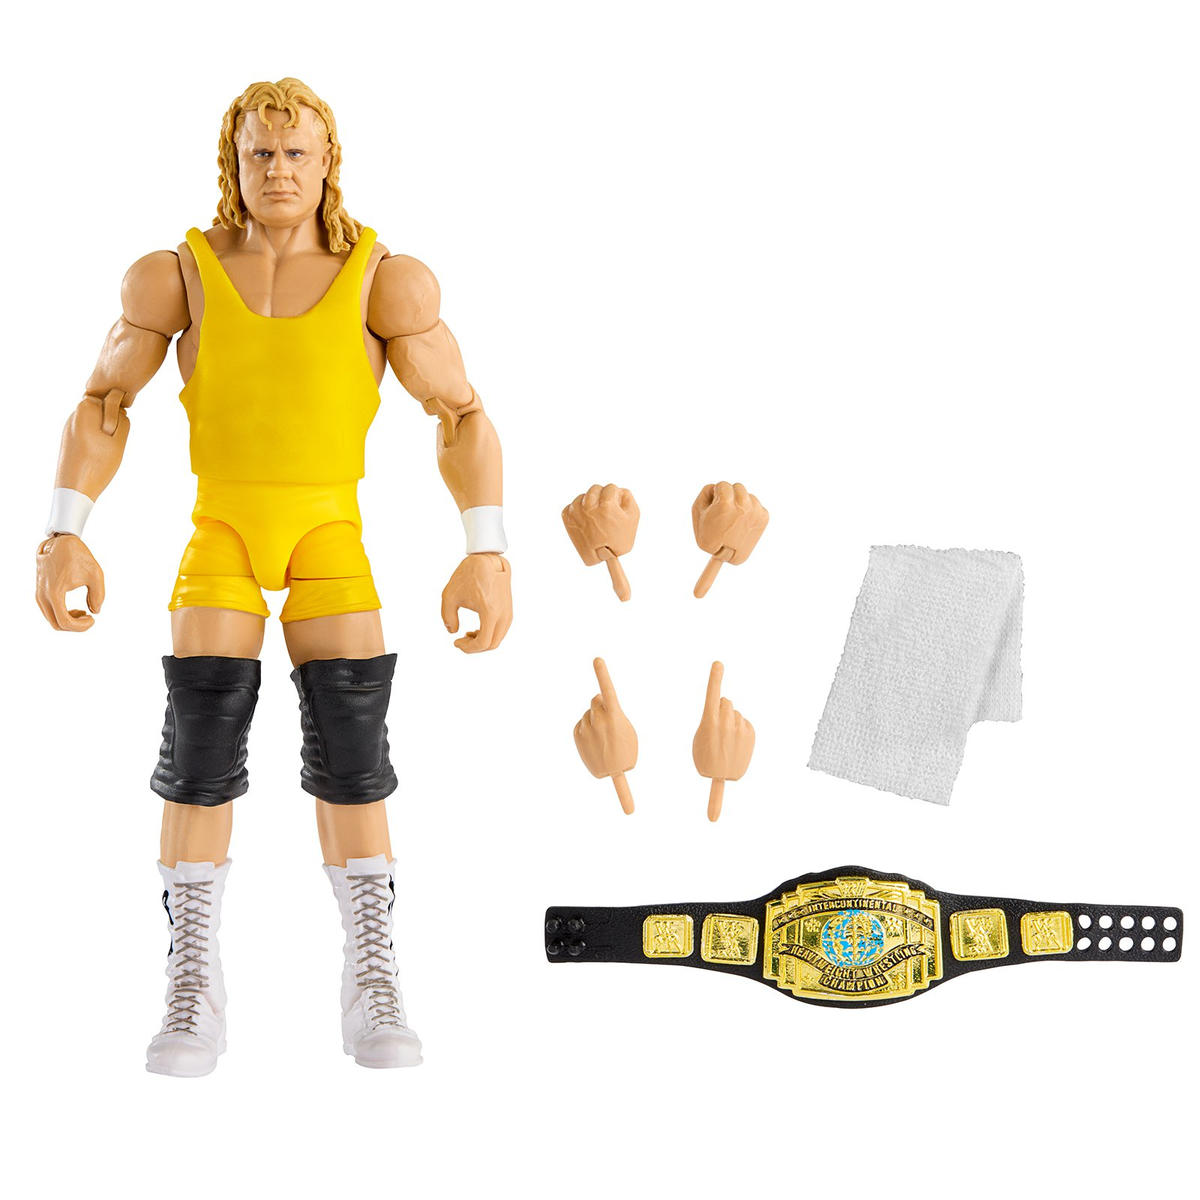 2023 WWE Mattel Elite Collection Legends Series 20 Mr. Perfect [Exclusive]